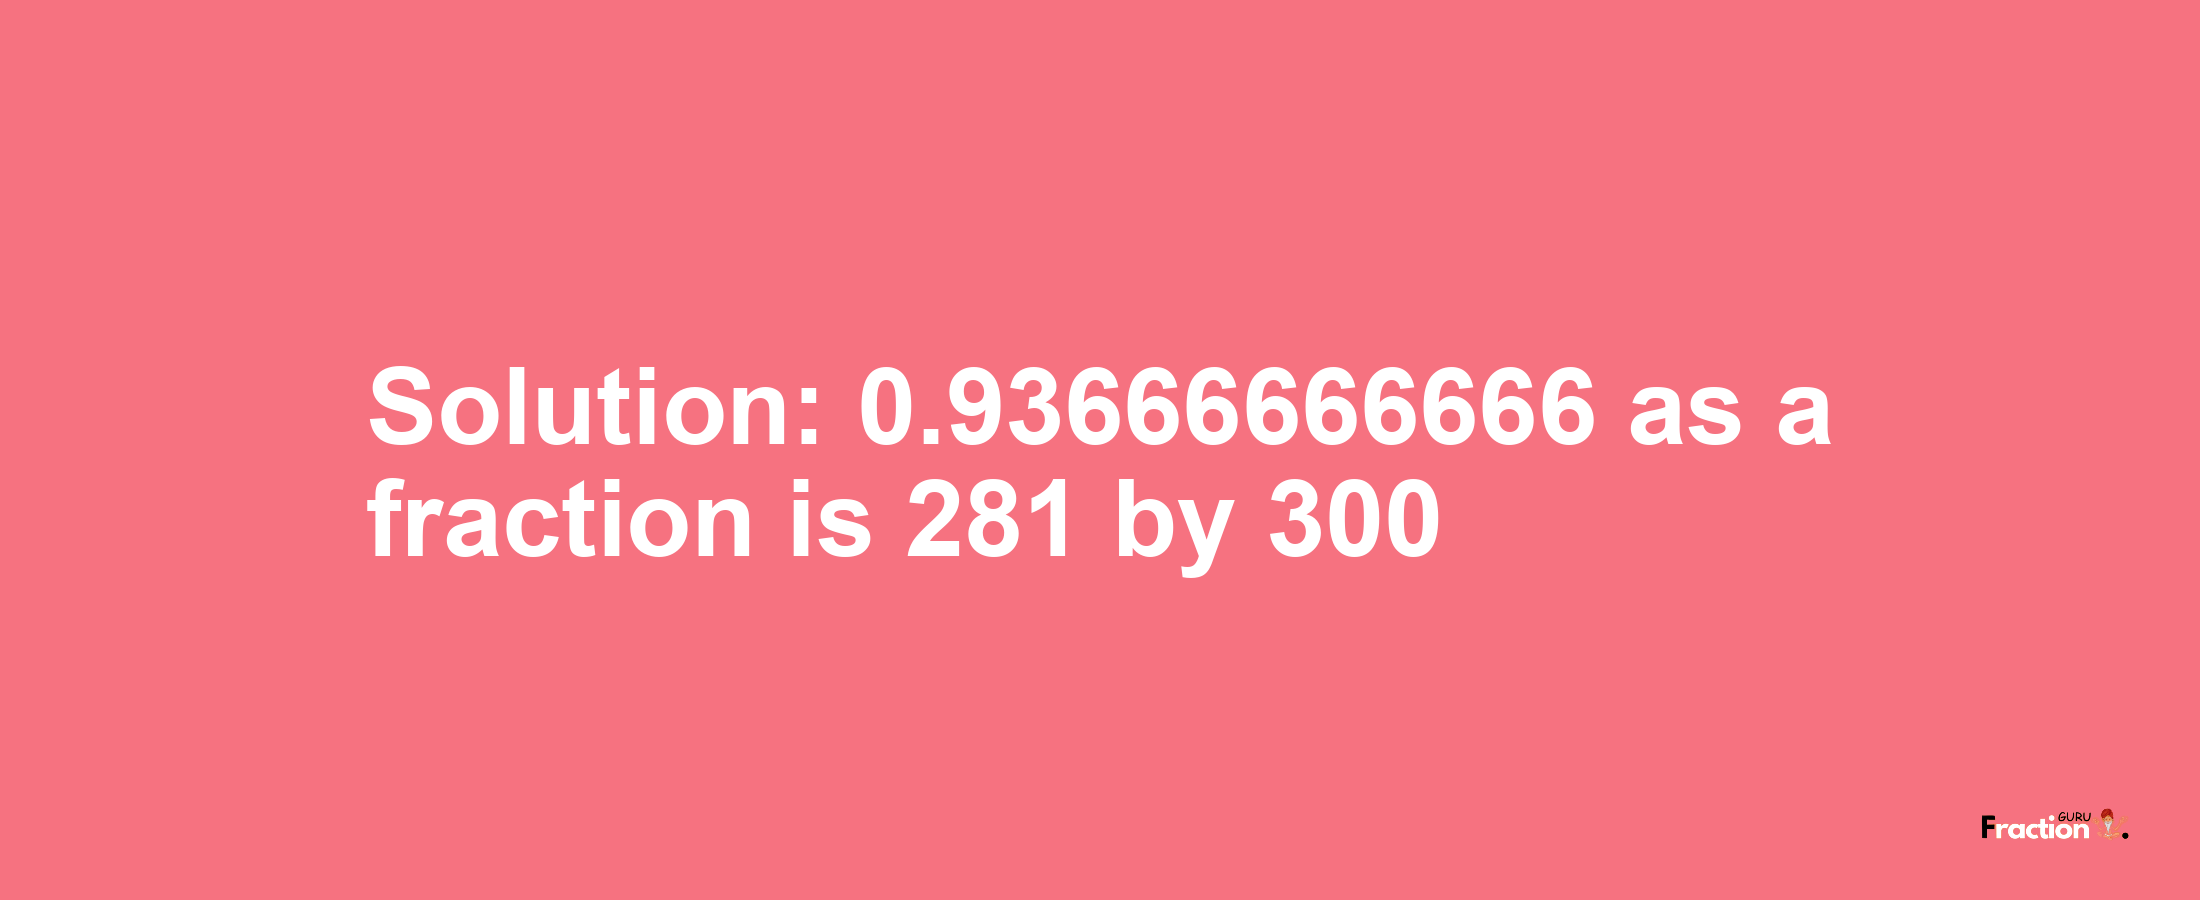 Solution:0.93666666666 as a fraction is 281/300